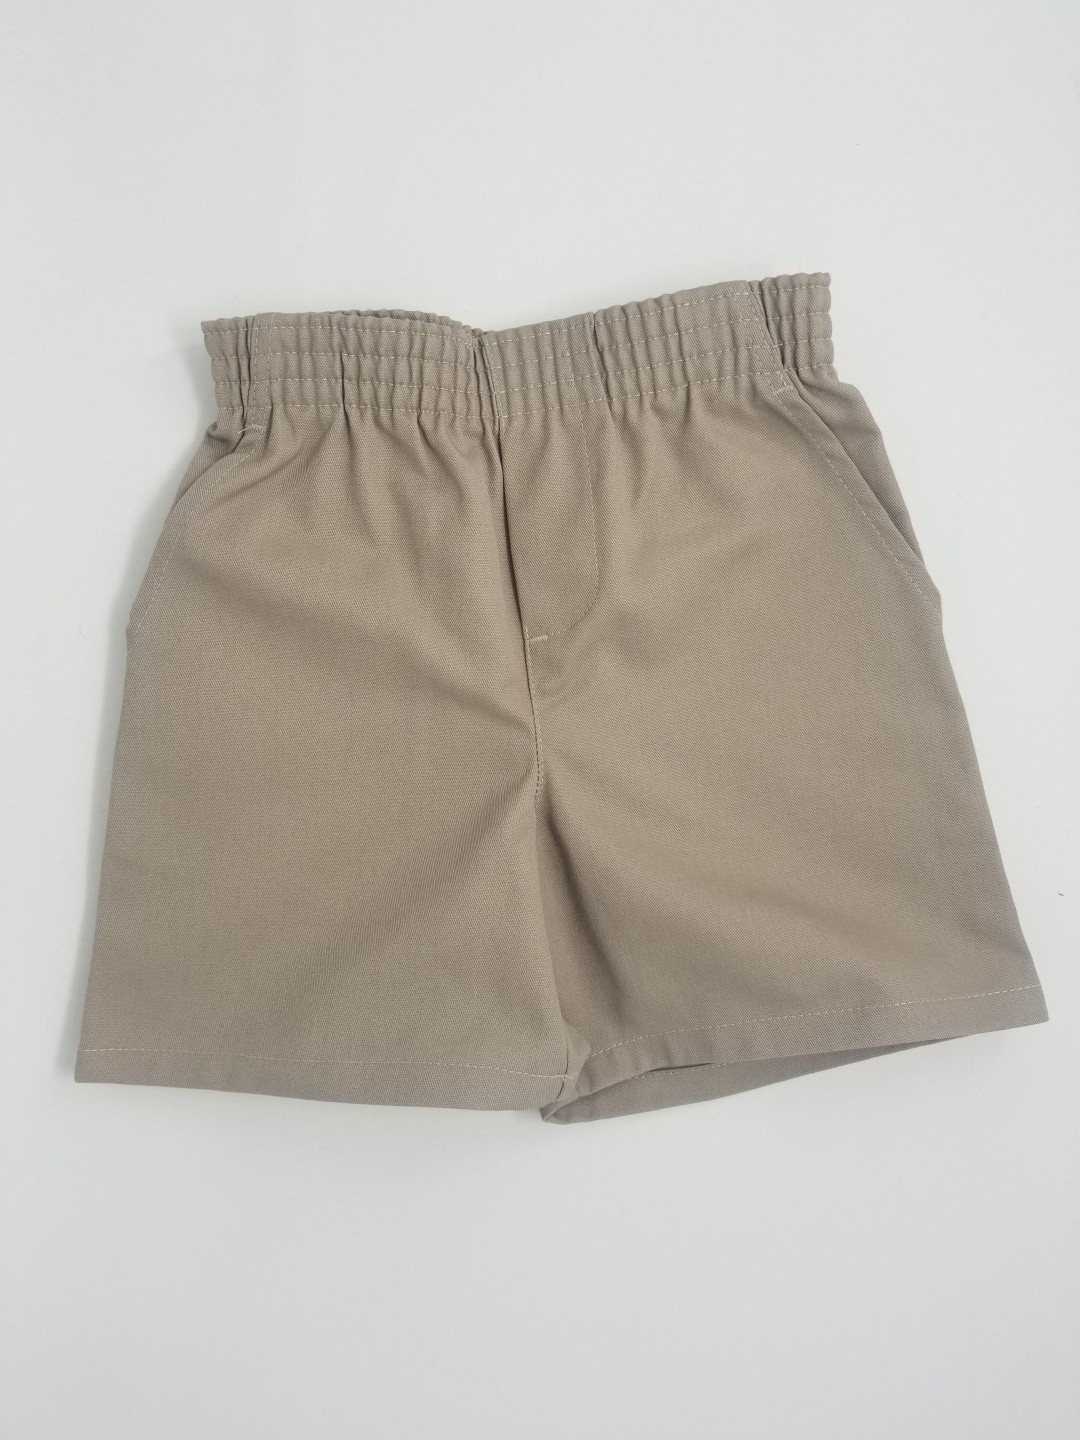 Toddler Pull-On Short- Solid Colors-Khaki